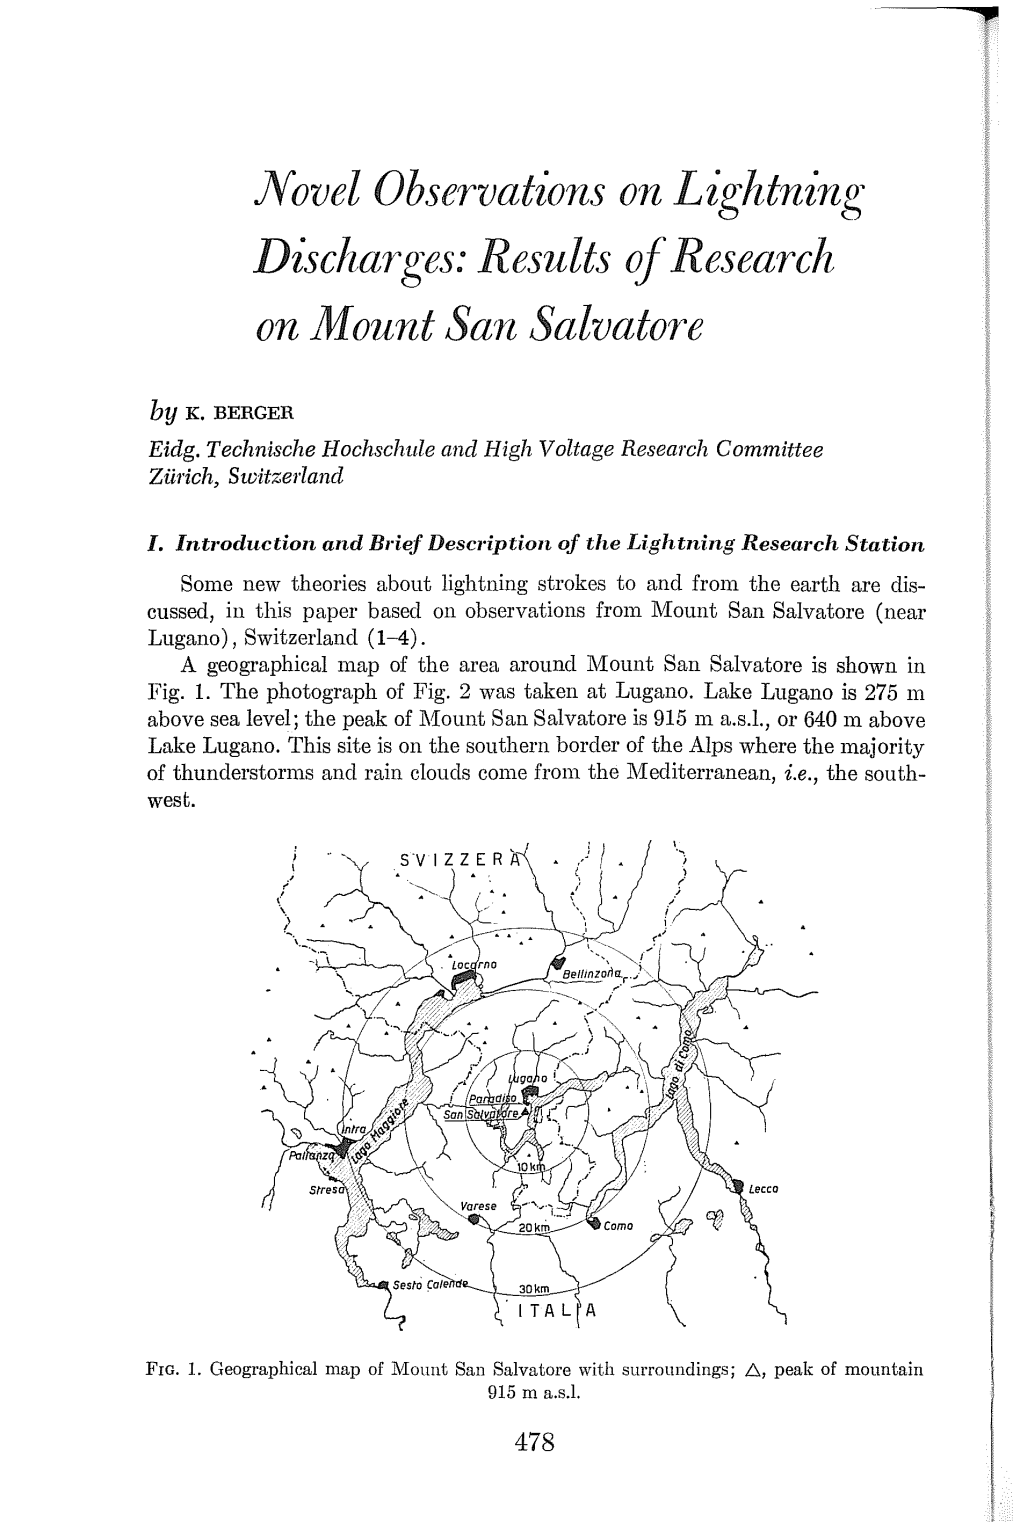 Novel Observations on Lightning Discharges: Results Ofresearch on Mount San Salvatore by K